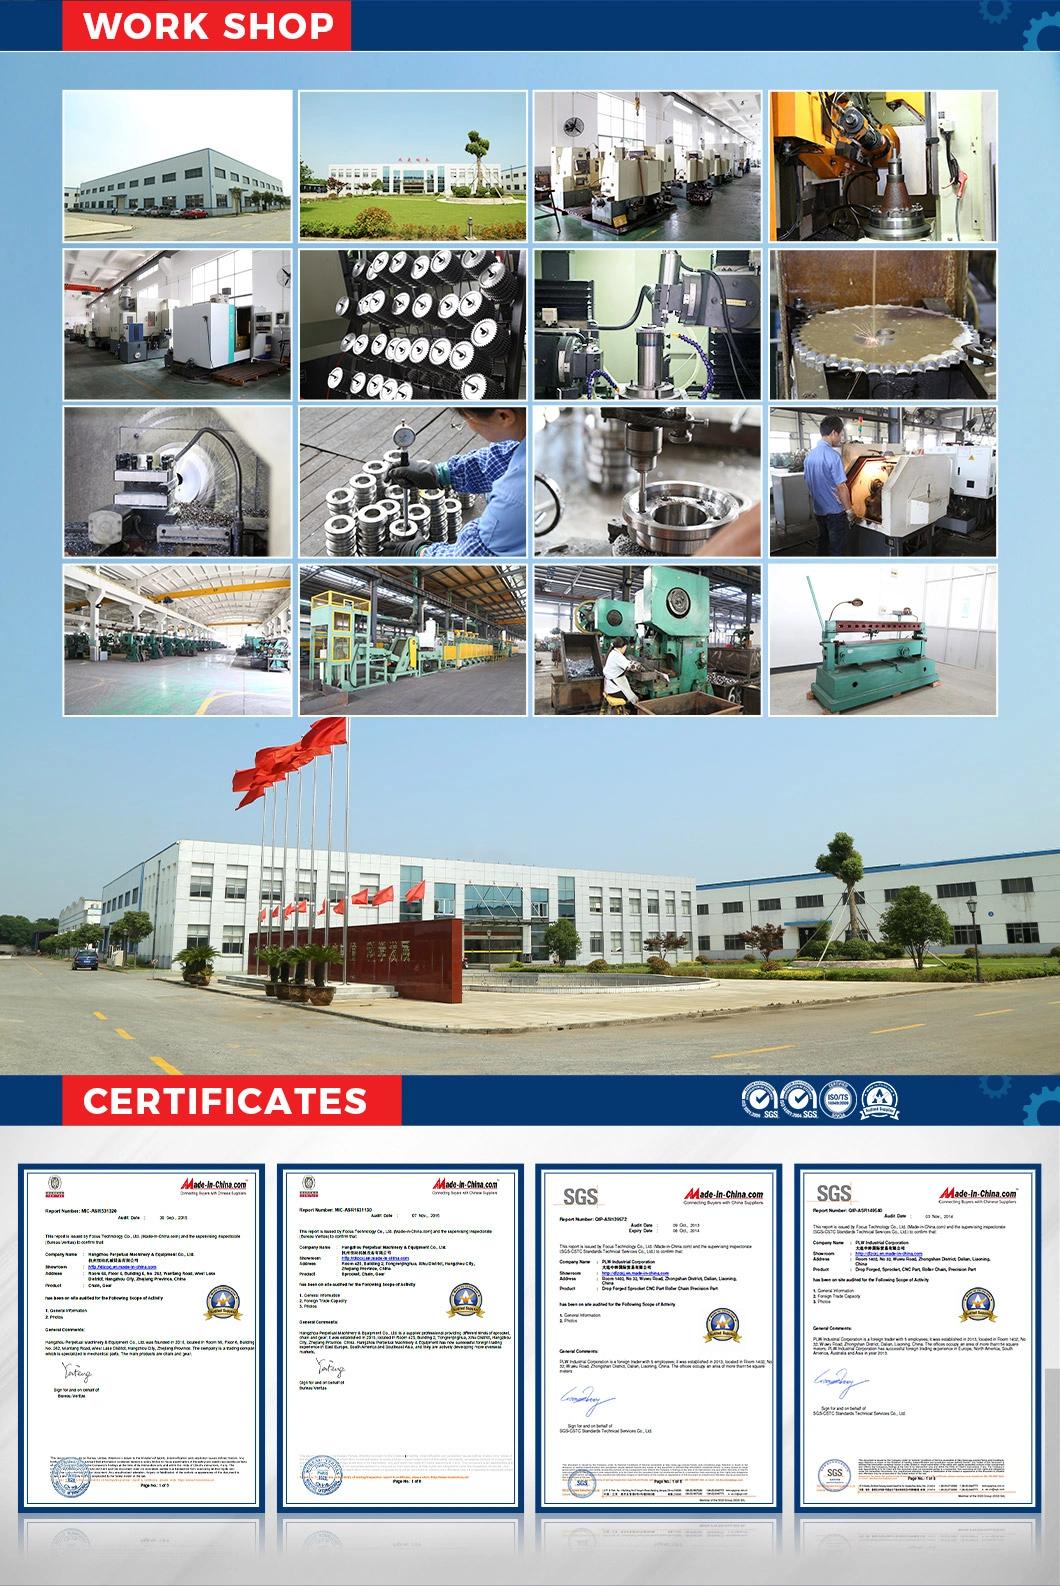 High Strength Agriculture Machinery Parts Agricultural Chain with Attachment